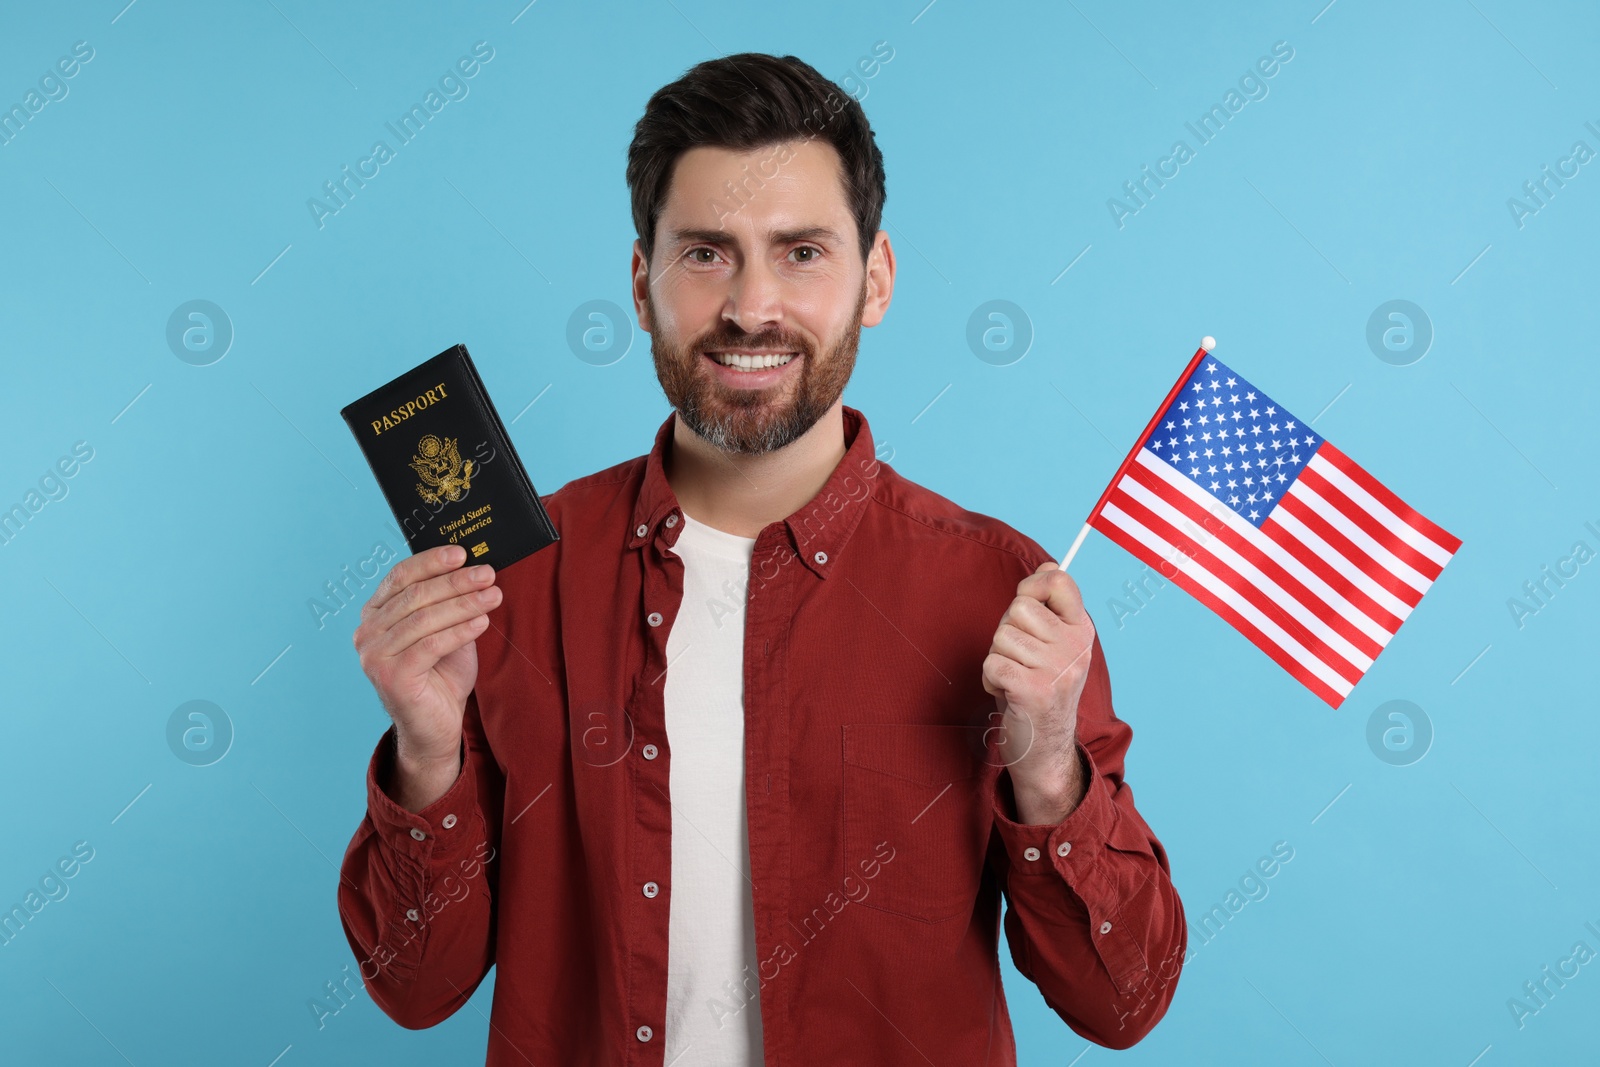 Photo of Immigration. Happy man with passport and American flag on light blue background